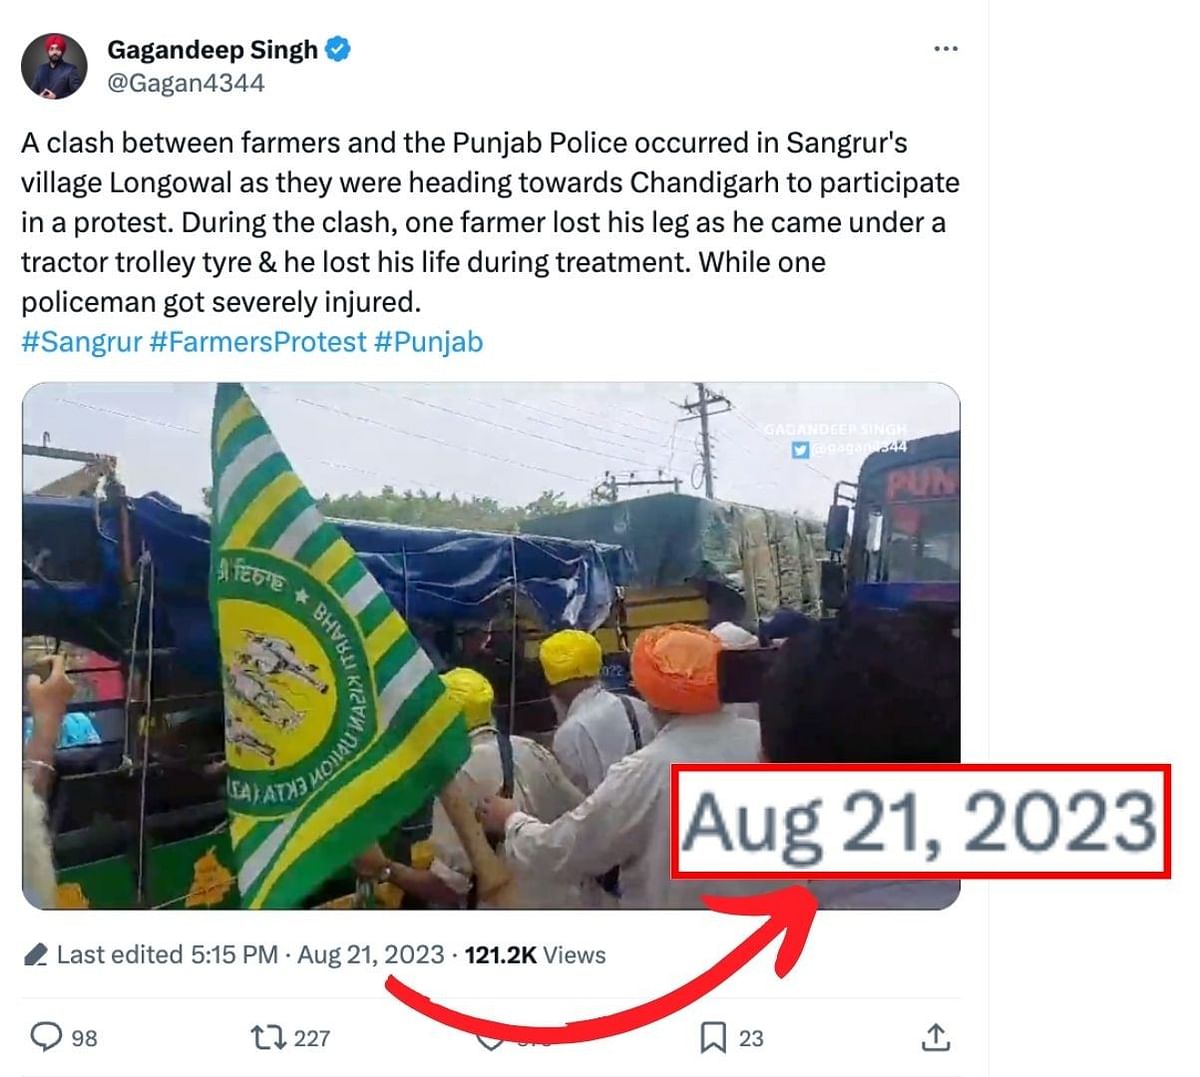 The video dates back to August 2023, when protesting farmers clashed with the Punjab police in Sangrur.